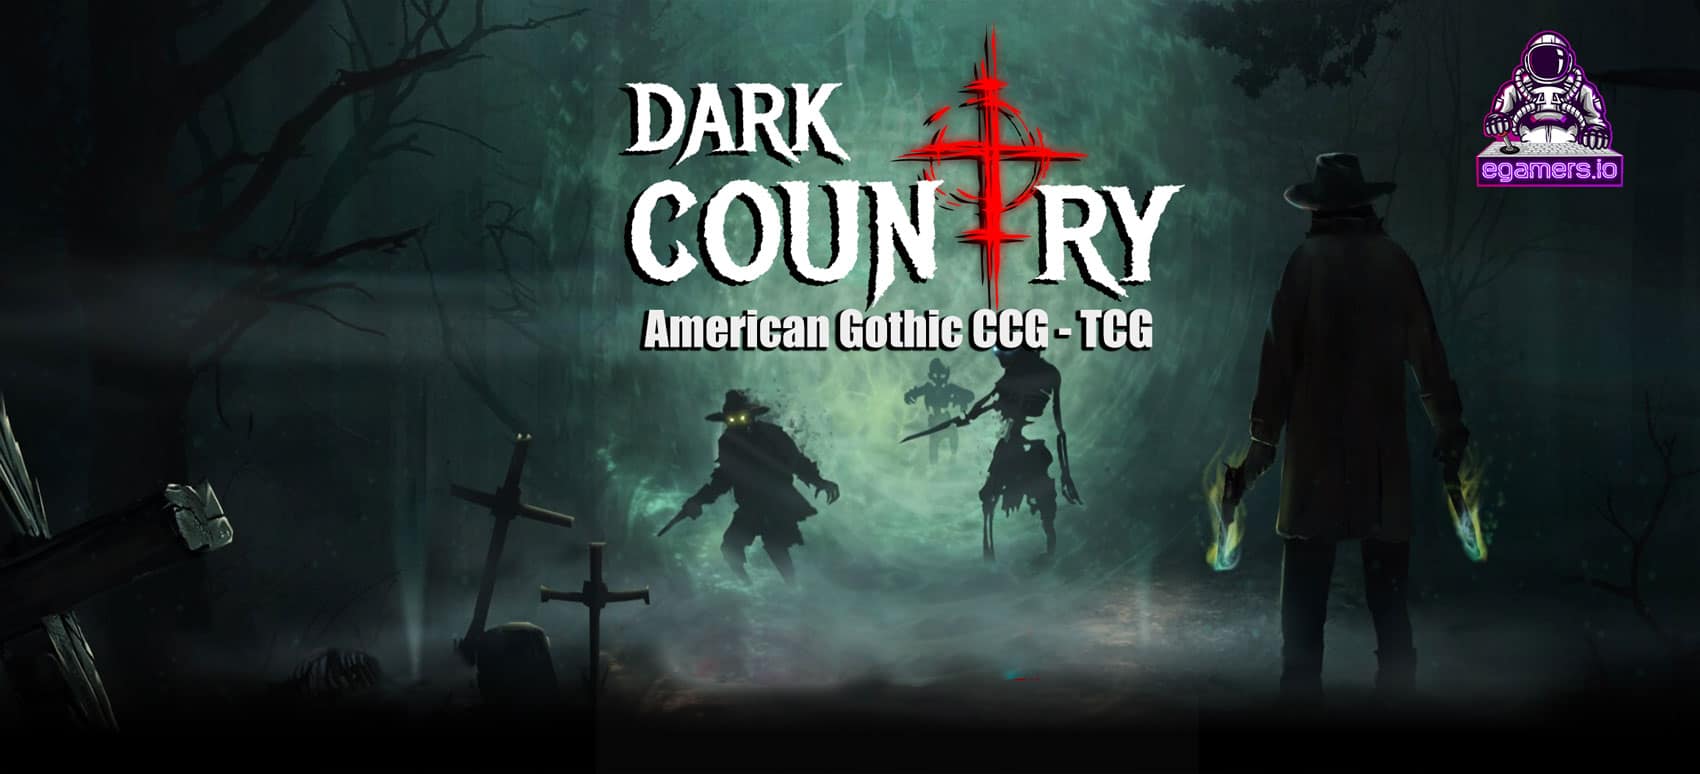 Dark Country american gothic tcg ccg blockchain game Dark Country is an upcoming multichain American gothic Collectible Card Game (CCG) with support for WAX, EOS, Ethereum, and TRON. Create, own and manage in-game items cards that are yours to keep forever. Dark Country is expected to launch a closed Early Access in April and a public beta in Q2, 2020.